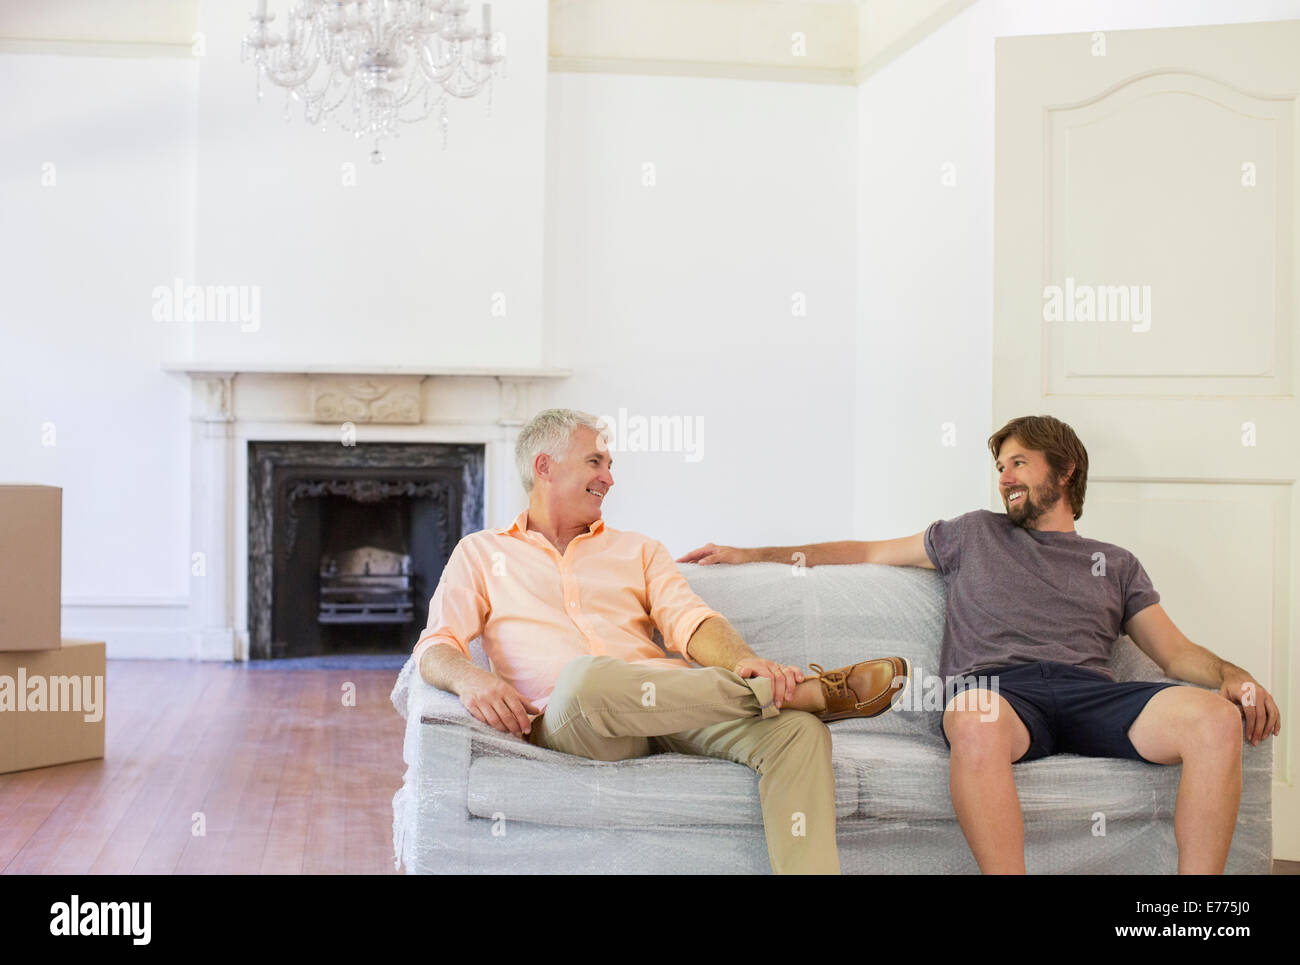 Father and son sitting on couch in living space Stock Photo